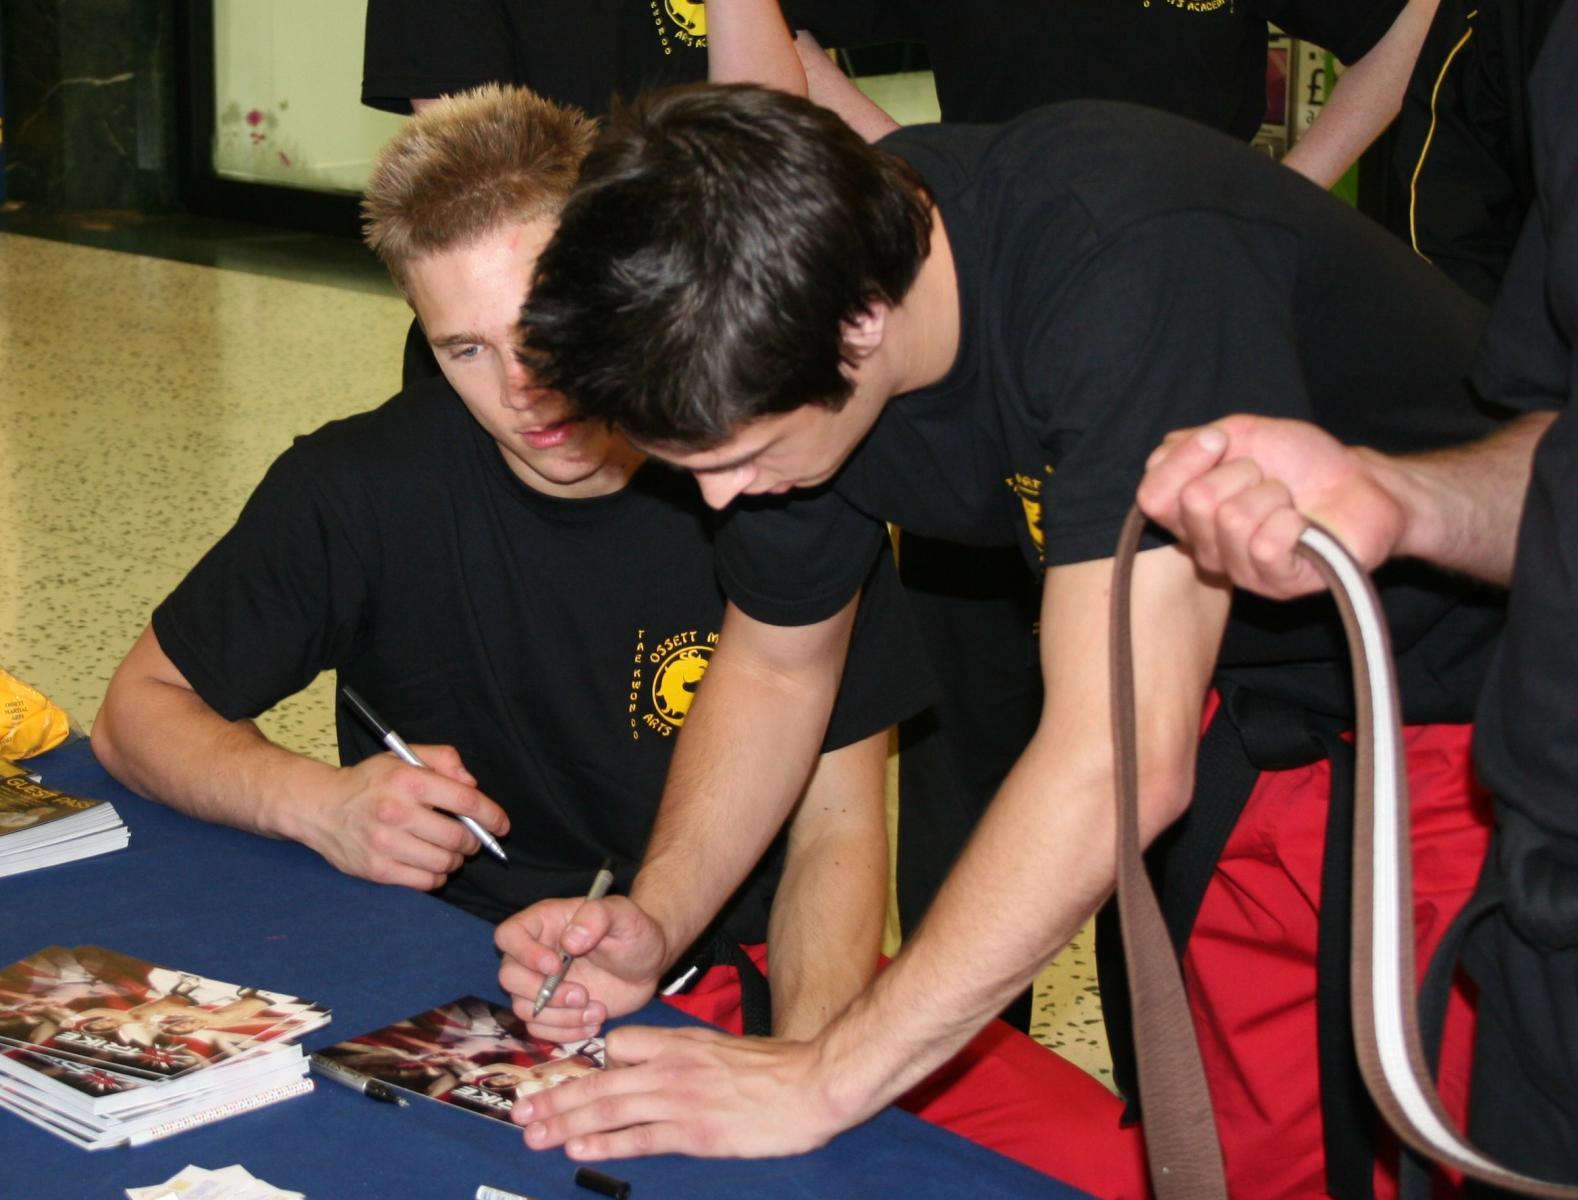 Danny Ball and Liam Richards signing autographs